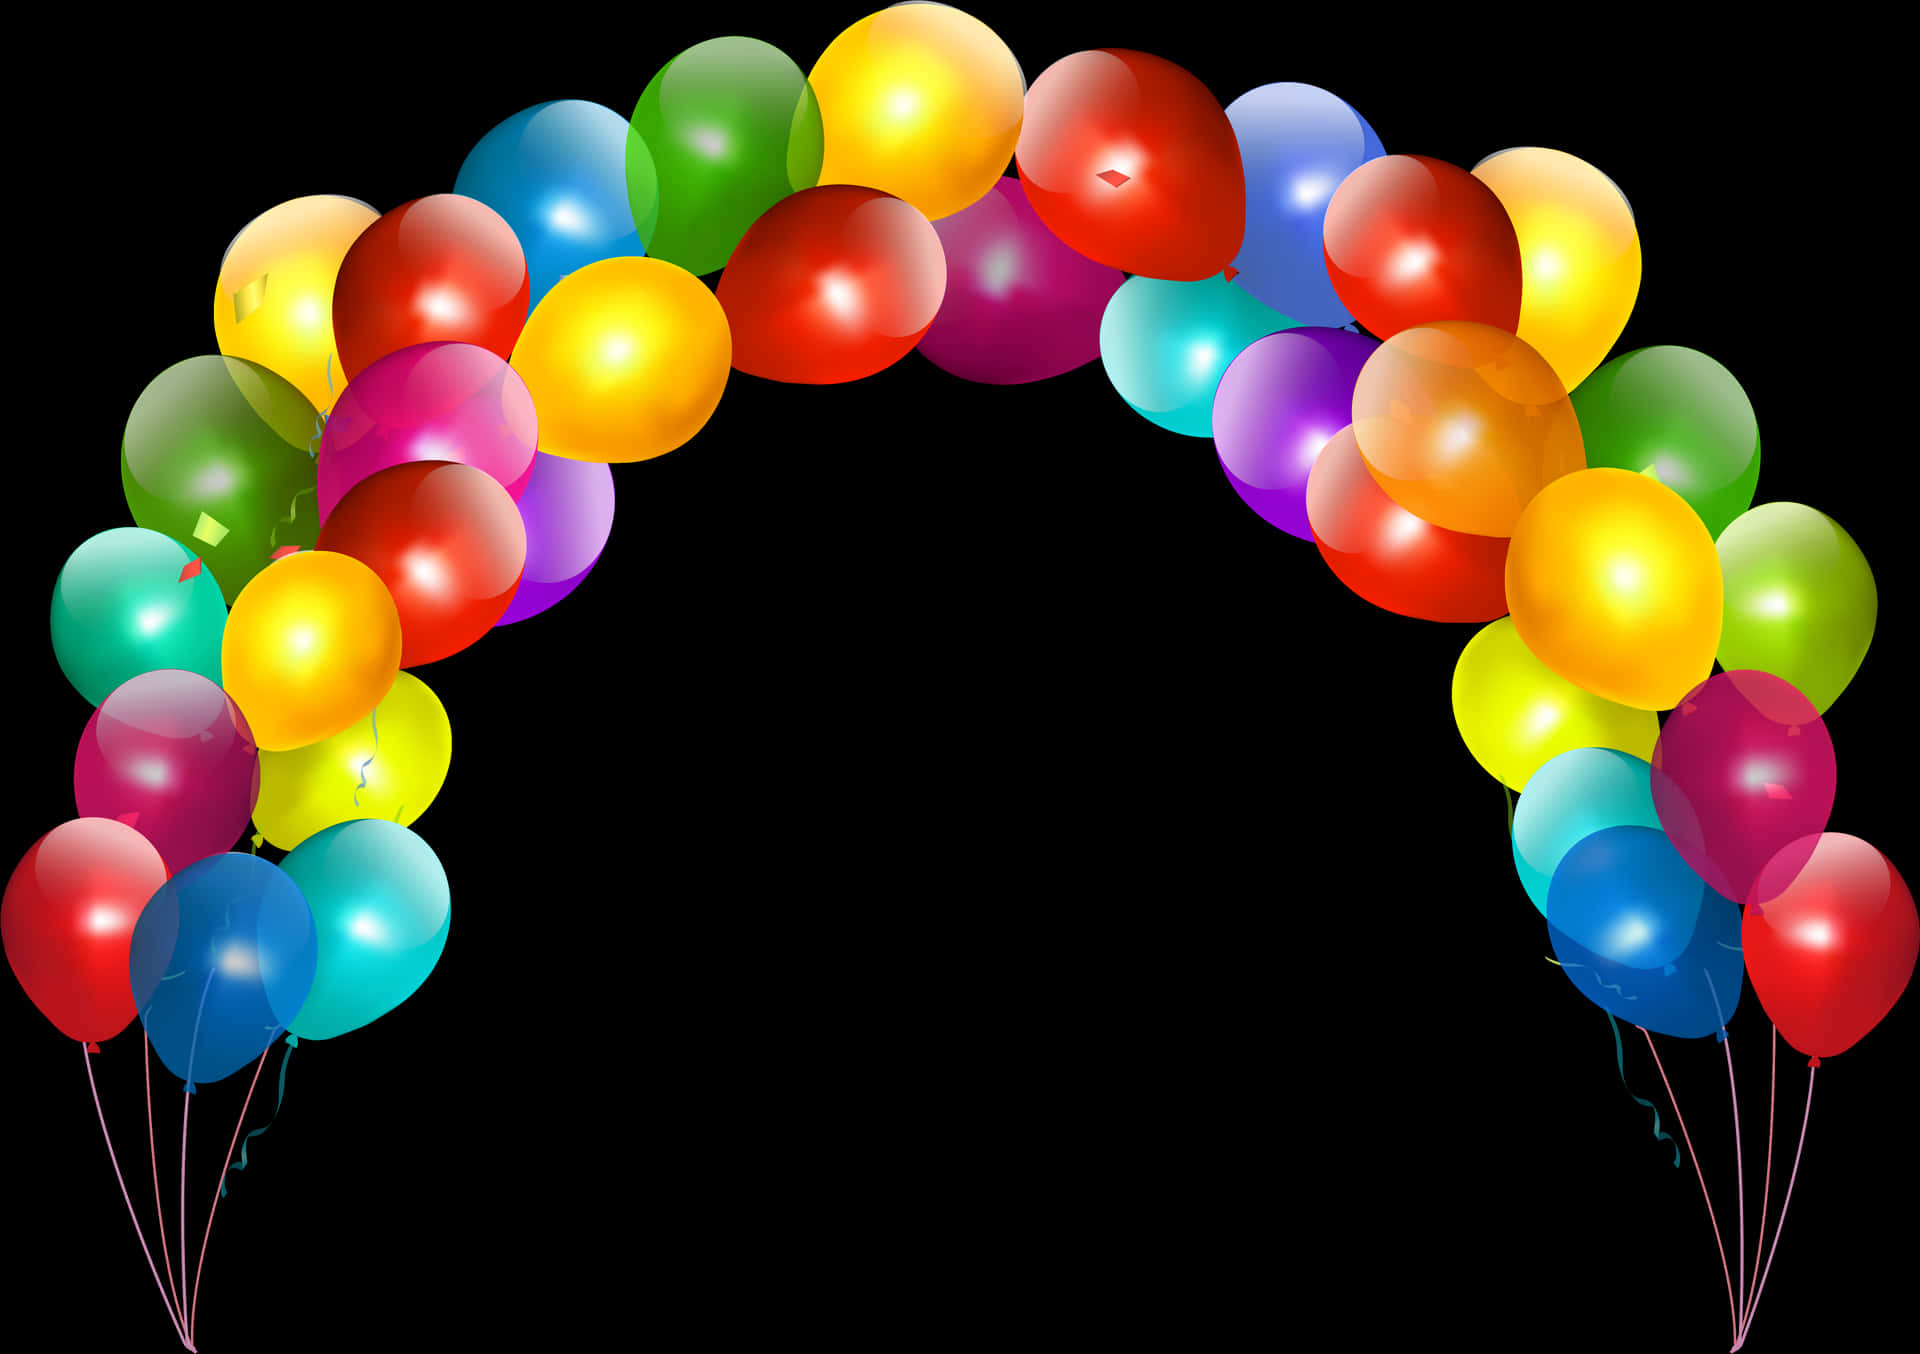 Colorful Balloon Arch.jpg PNG